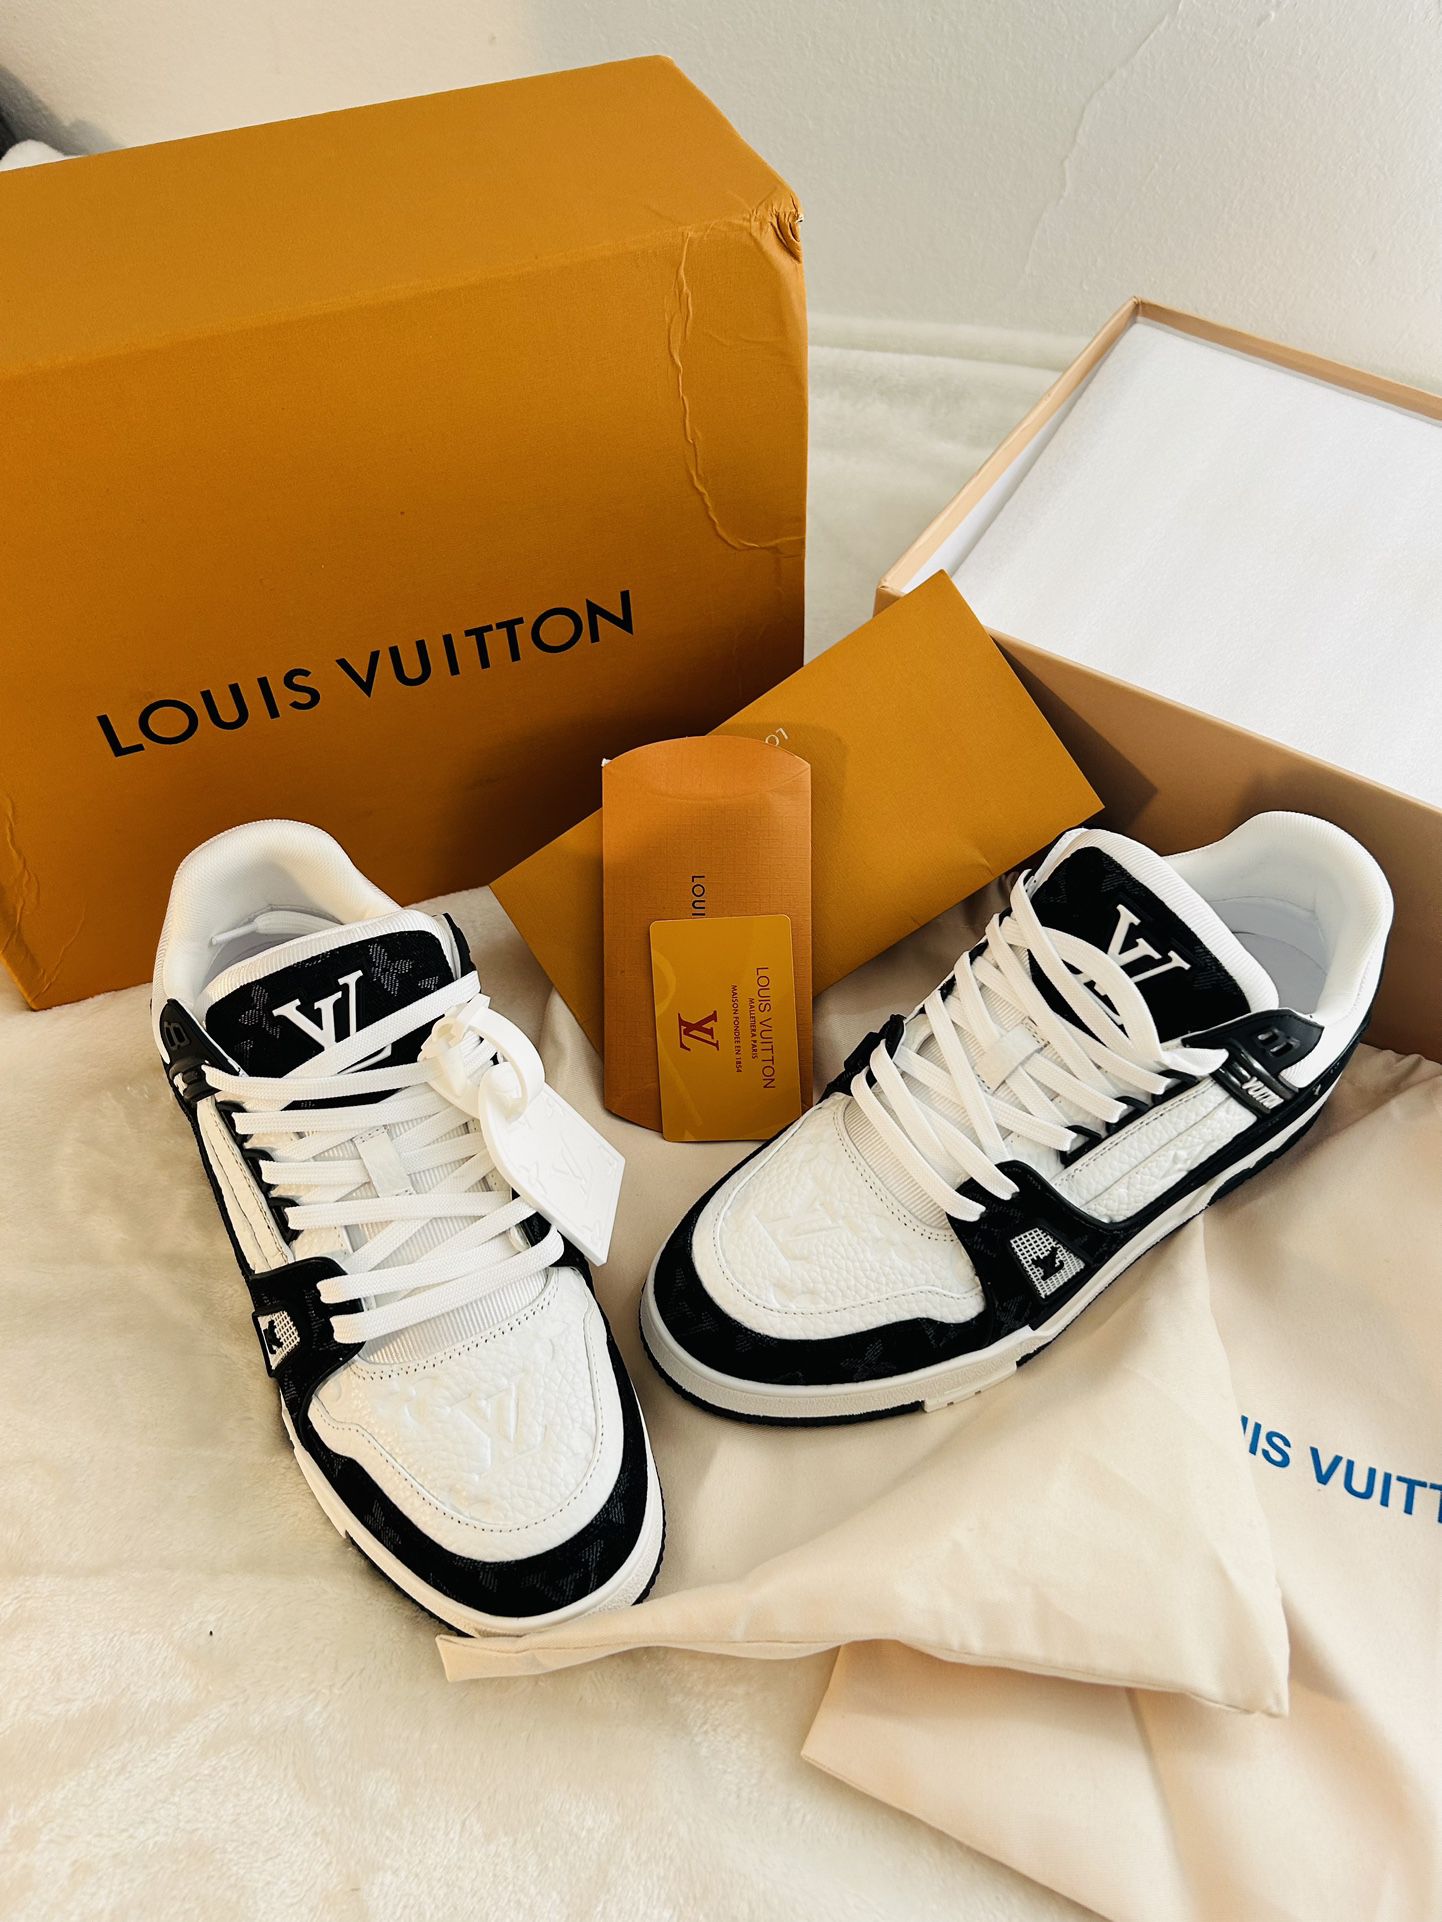 Shoes LV Man for Sale in Thousand Oaks, CA - OfferUp